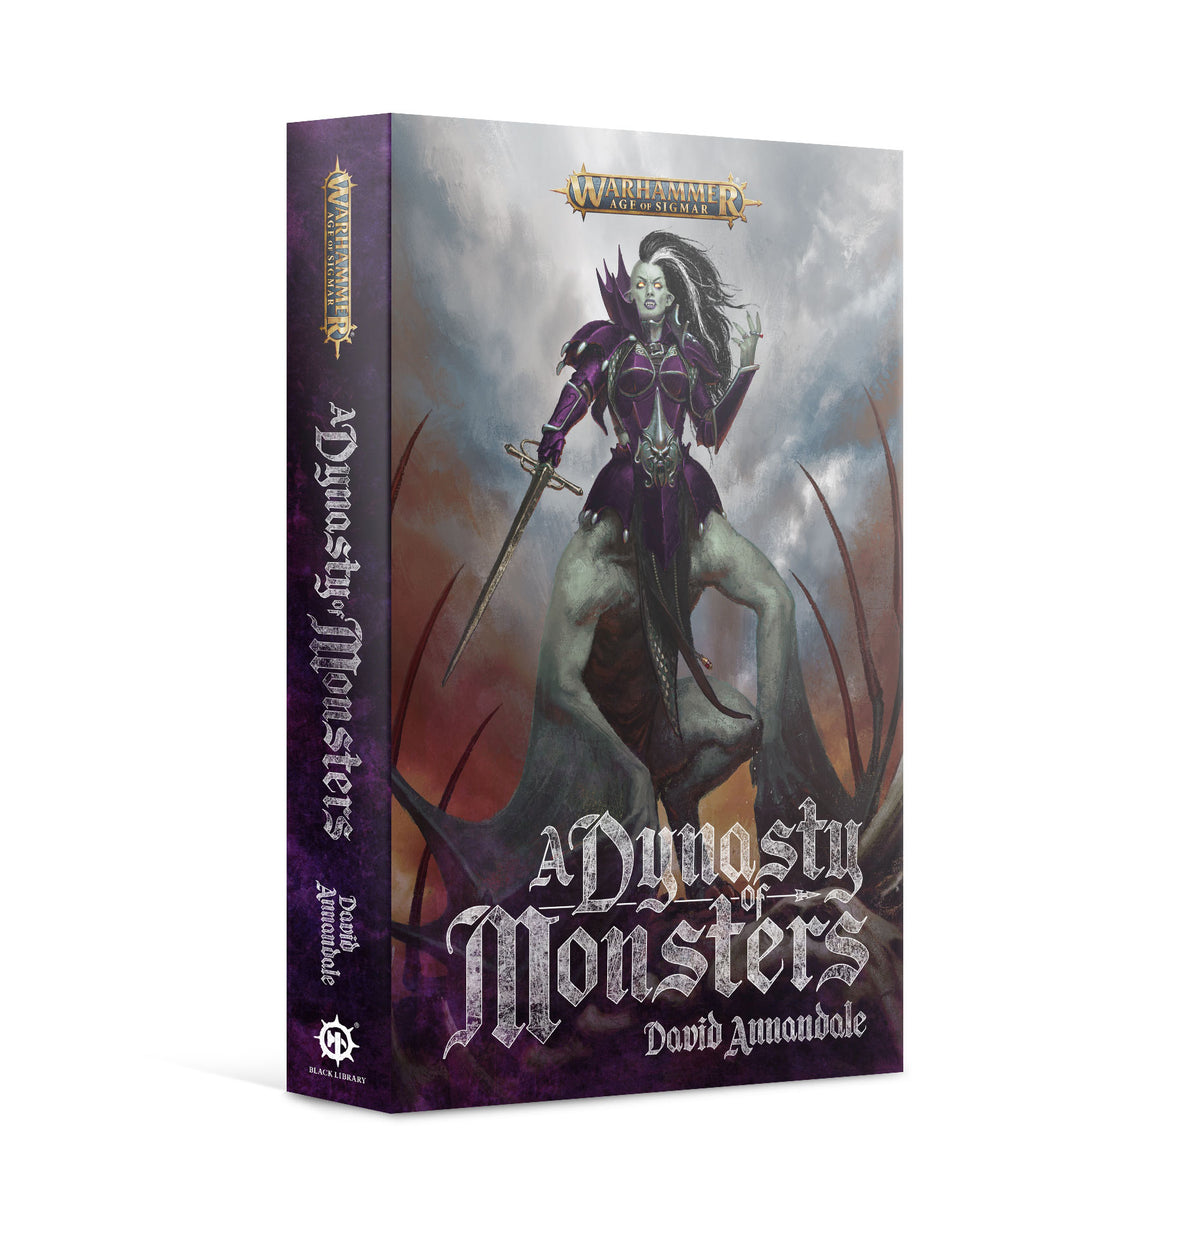 A Dynasty of Monsters (Novel HB)